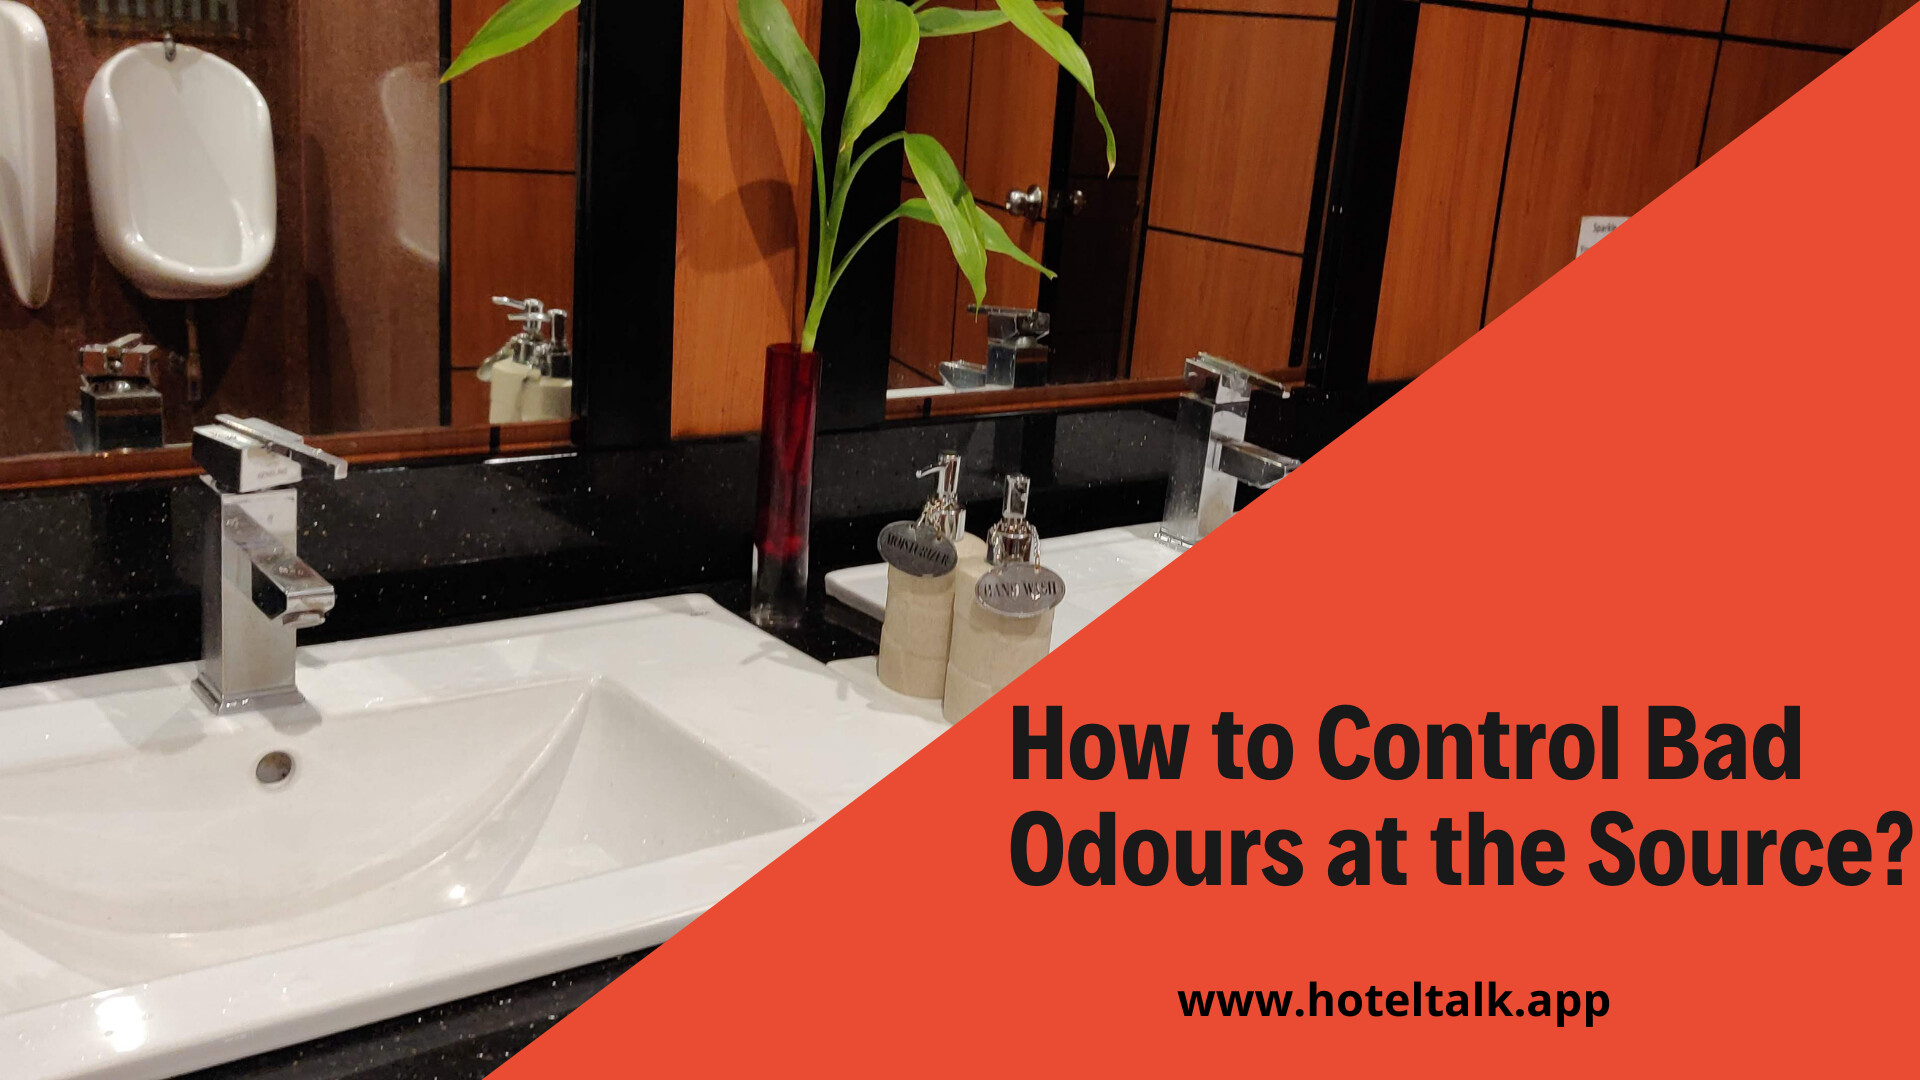 How to Control Bad Odours at the Source